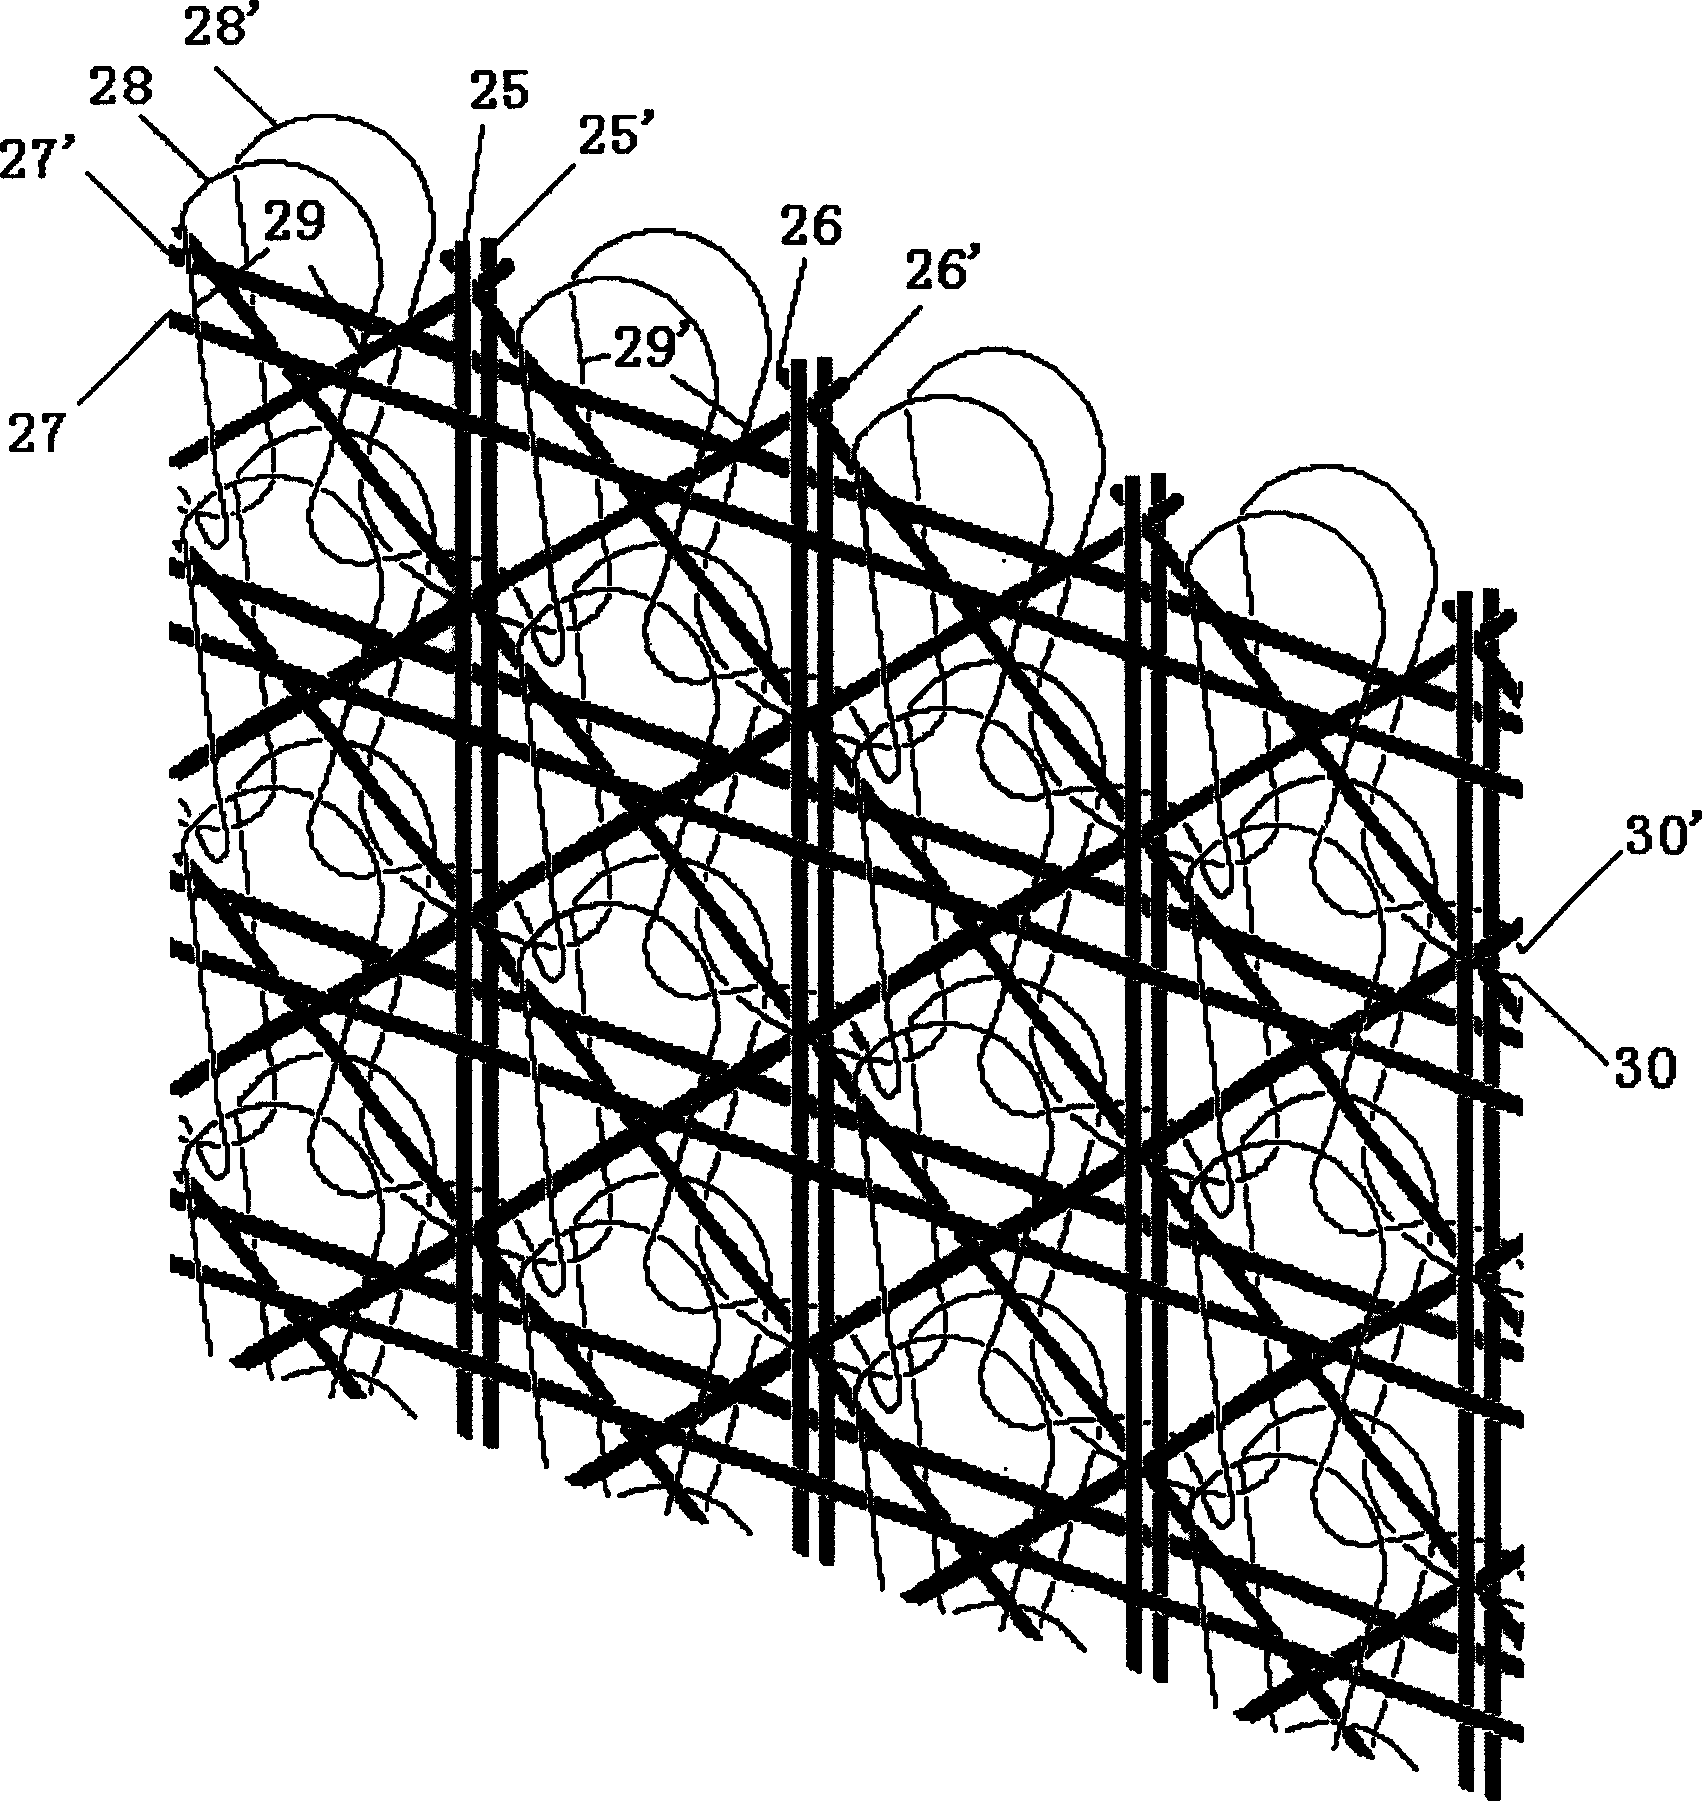 Knitting structure, method and apparatus